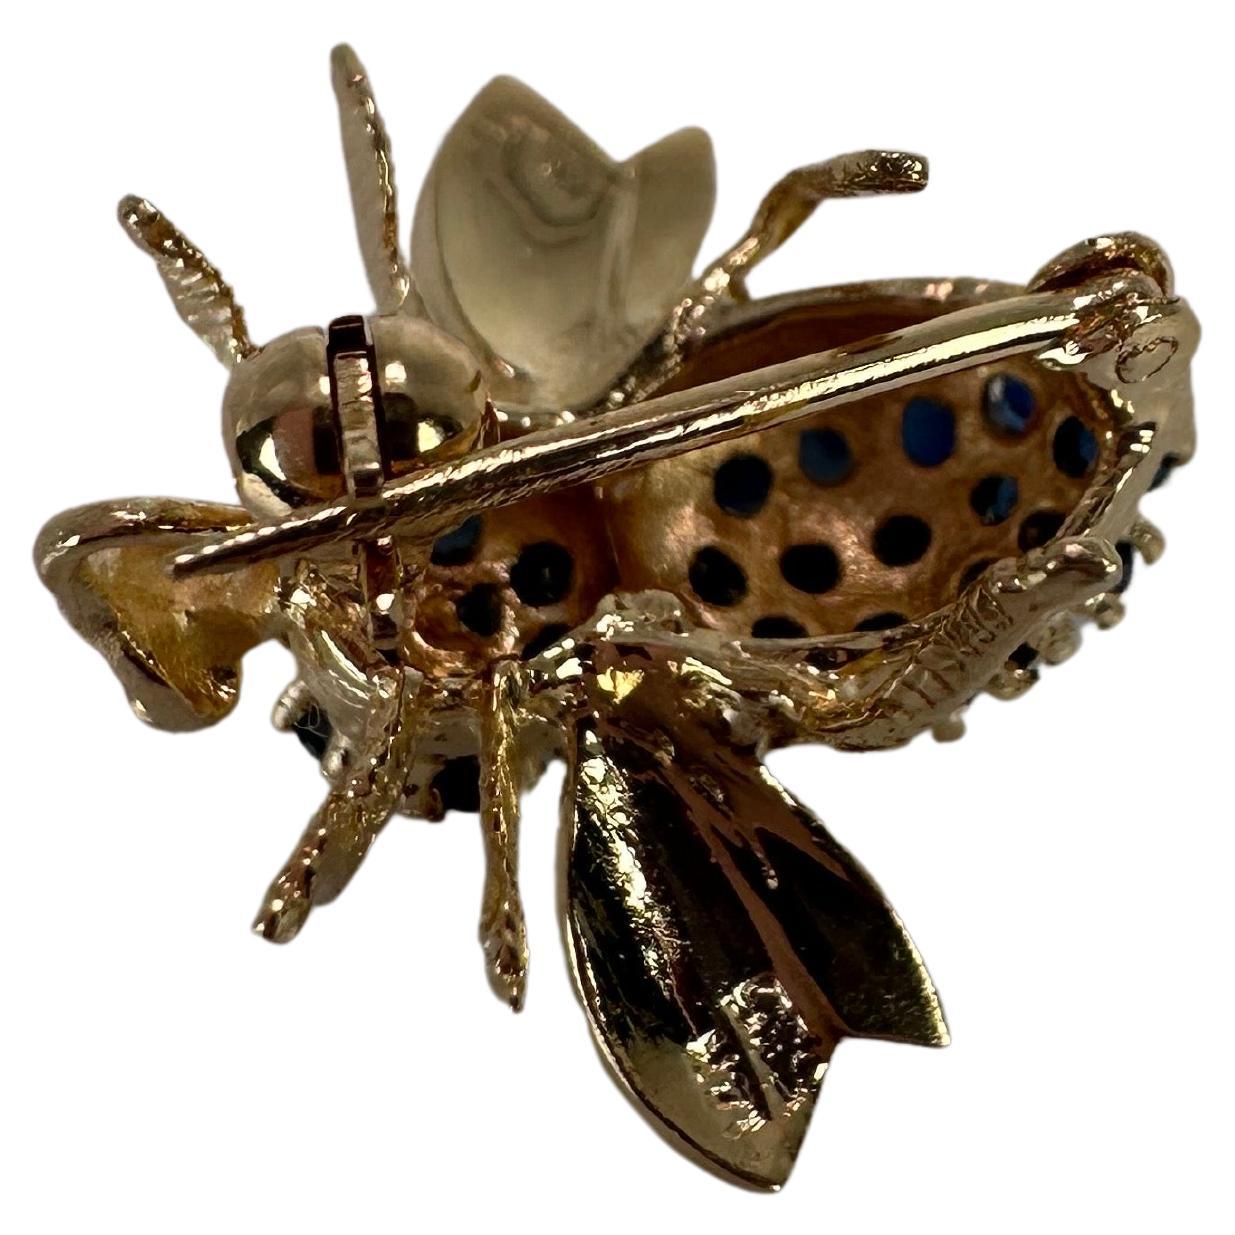 Sapphire bee brooch, beautifully made in 14KT yellow gold.

METAL: 14KT yellow gold
Grams:2,82
Item2500004 ik

WHAT YOU GET AT STAMPAR JEWELERS:
Stampar Jewelers, located in the heart of Jupiter, Florida, is a custom jewelry store and studio